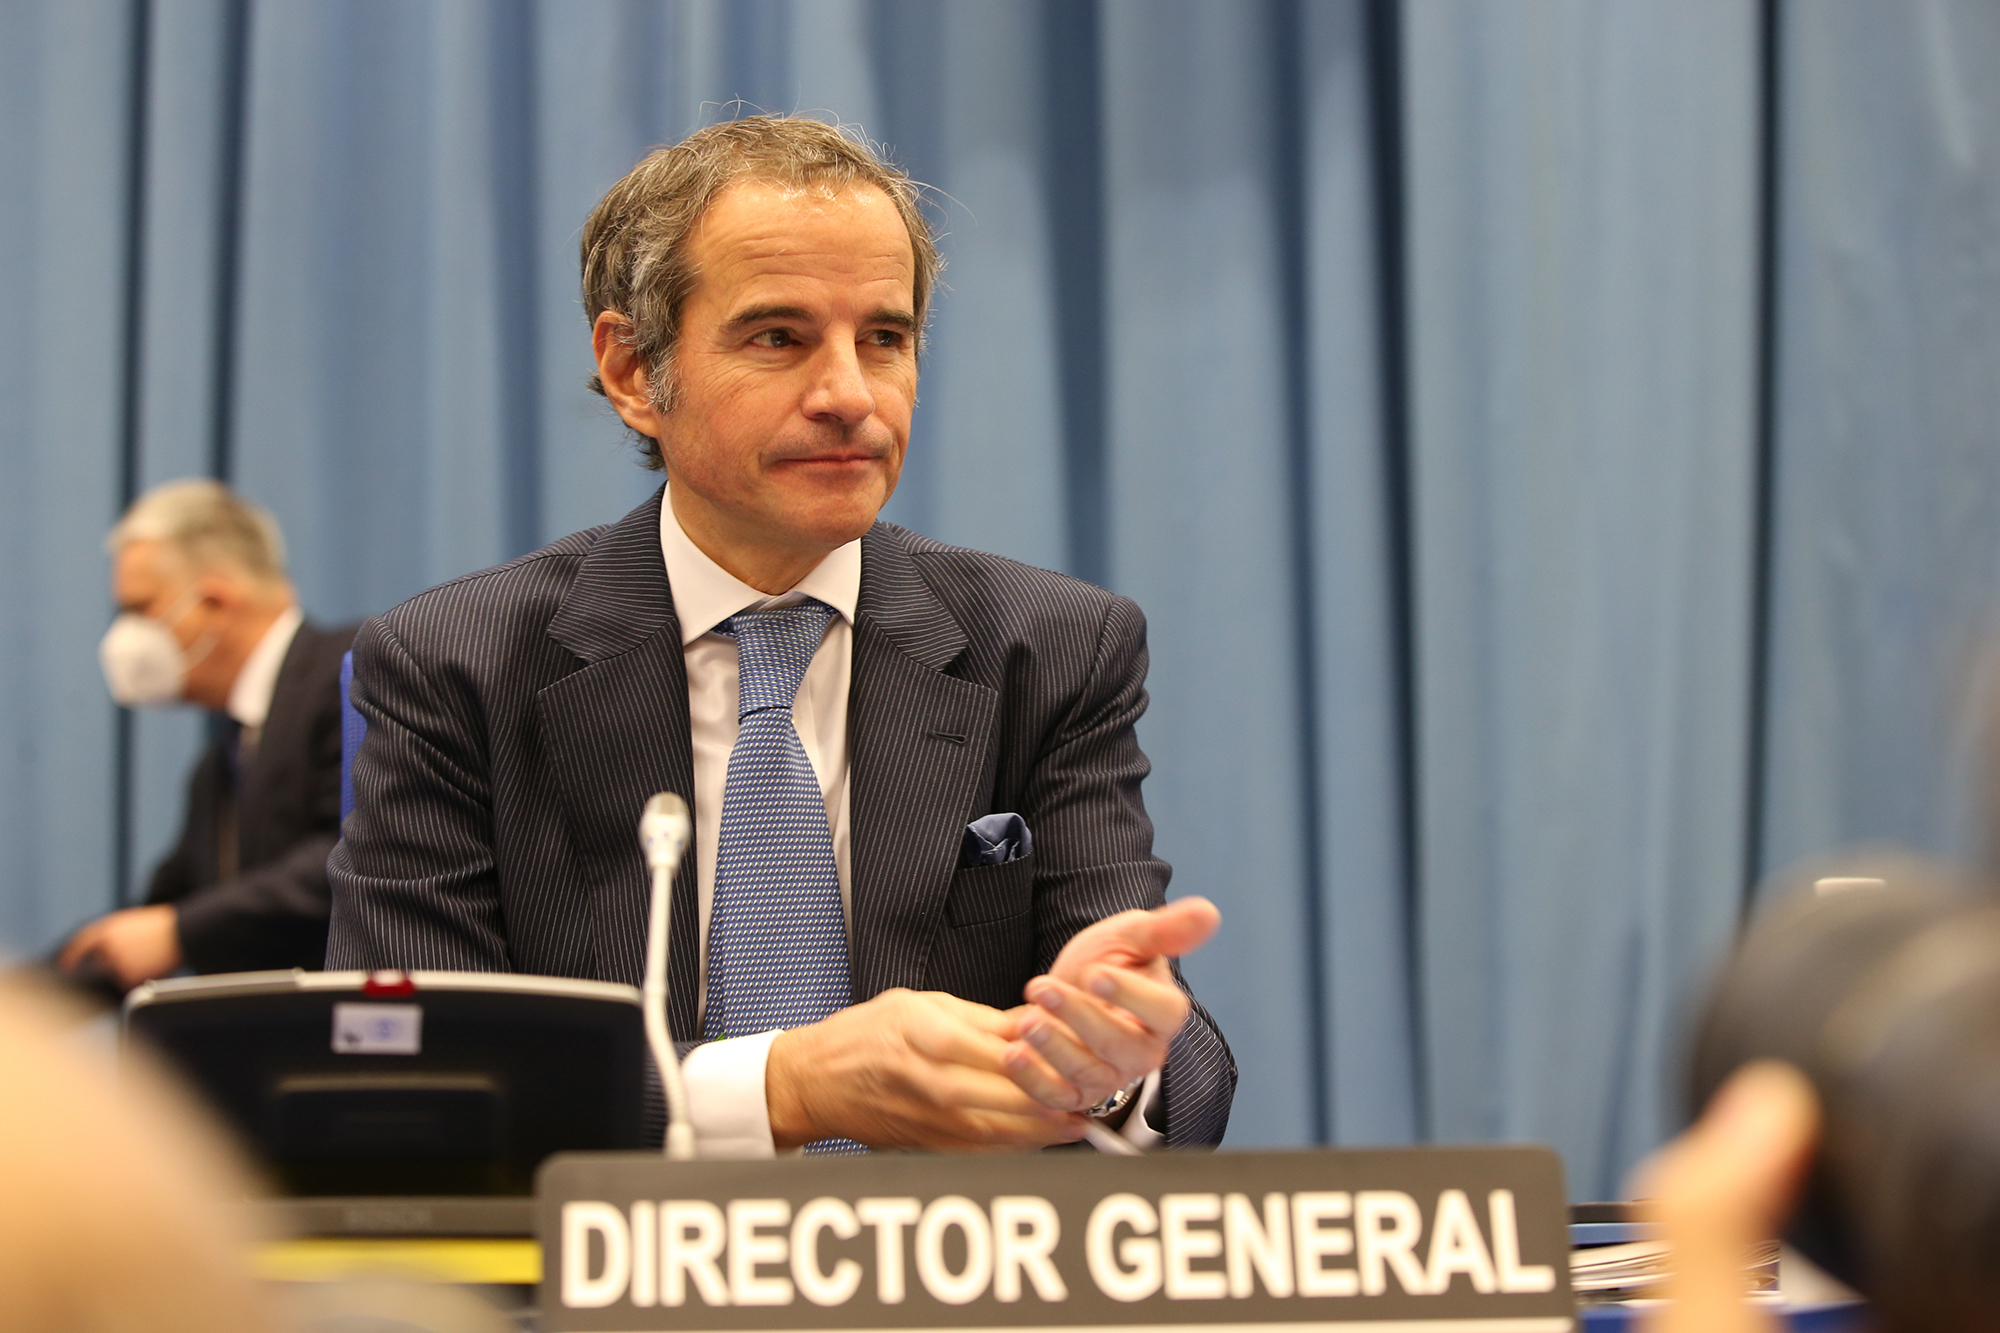 Director General of the International Atomic Energy Agency (IAEA) Rafael Mariano Grossi attends the IAEA Board of Governors meeting at the IAEA headquarters in Vienna, Austria, on March 7.